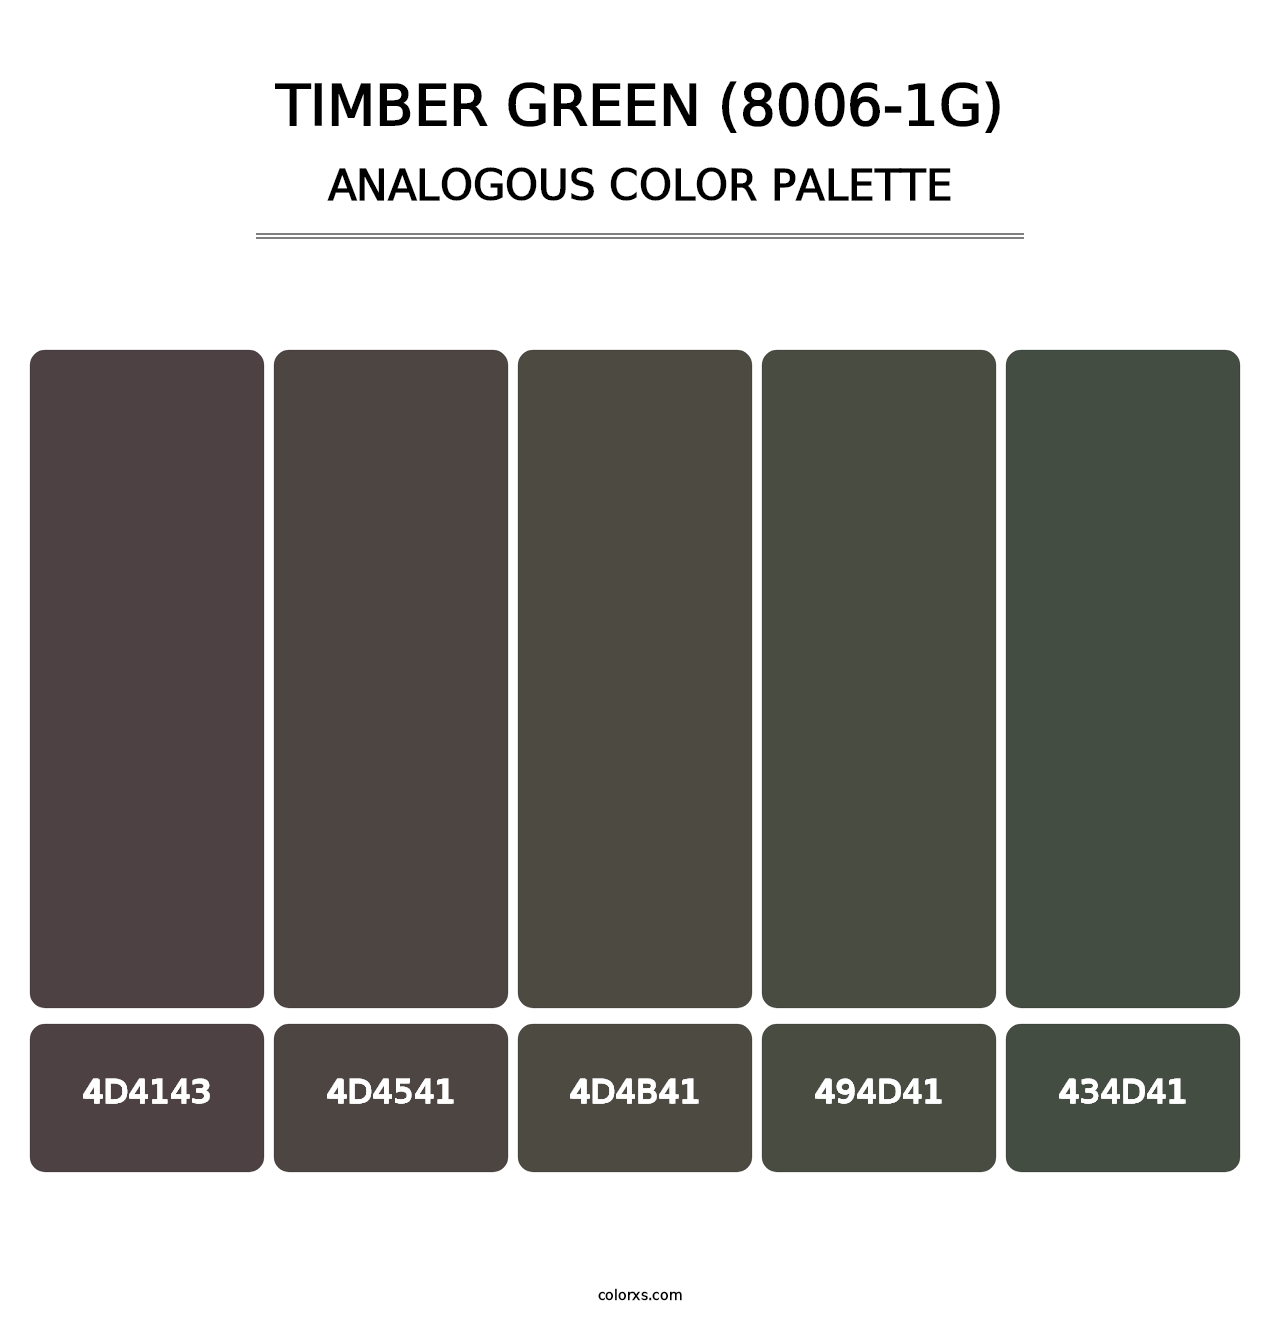 Timber Green (8006-1G) - Analogous Color Palette